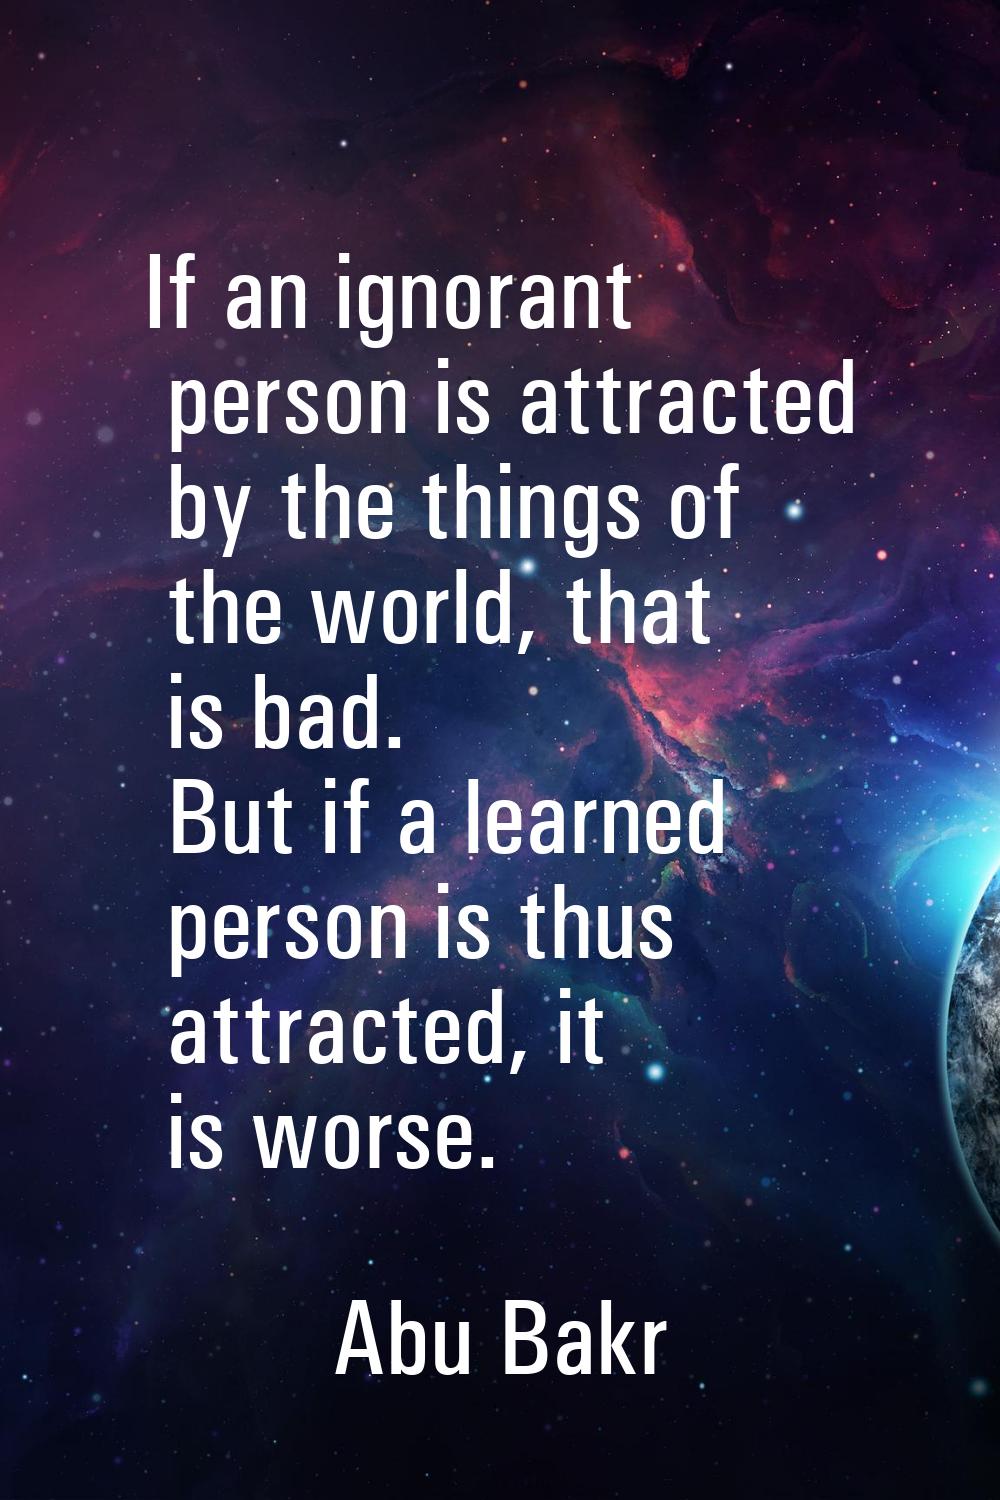 If an ignorant person is attracted by the things of the world, that is bad. But if a learned person